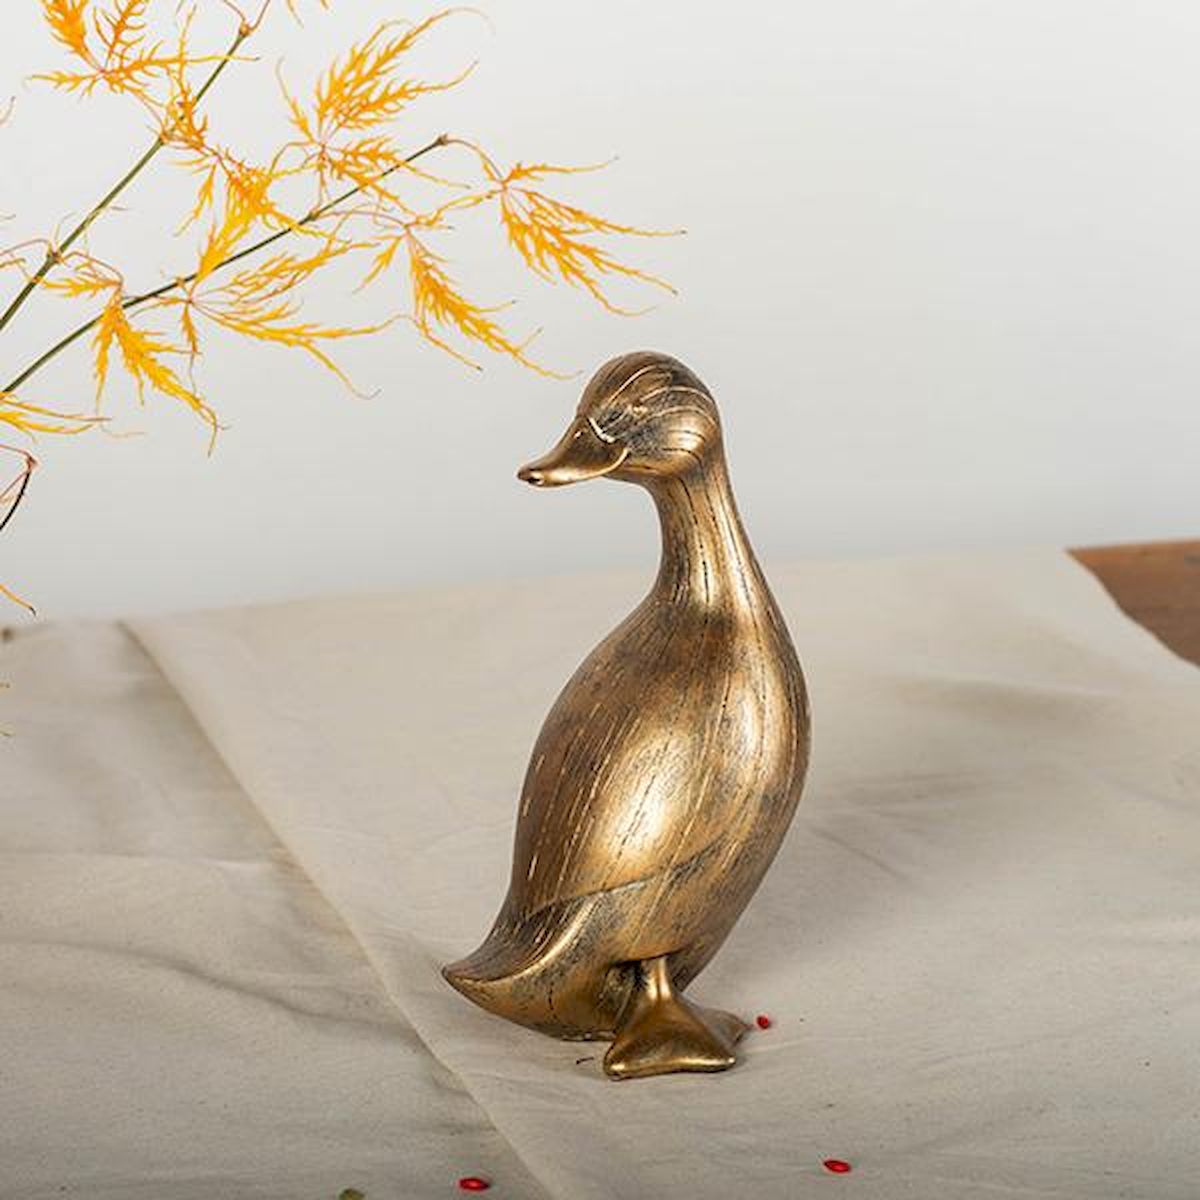 Picture of Forpost FP-LCD-348 Decorative Duck Figurine